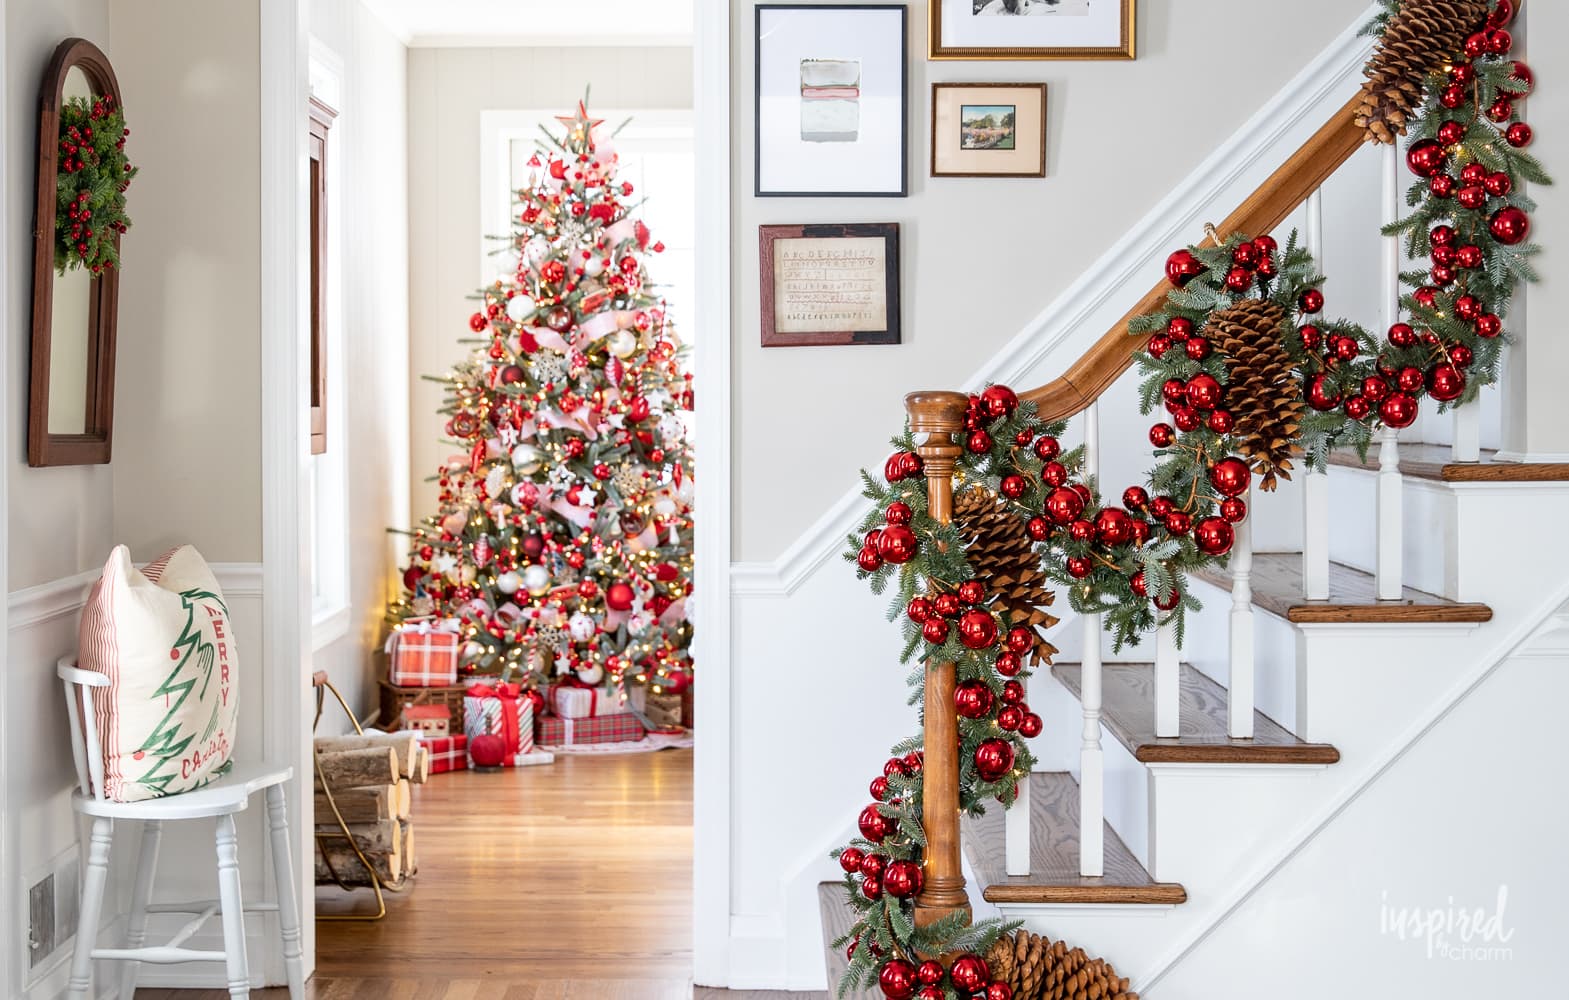 Indoor and Outdoor Christmas Decor Ideas - Christmas Home Tour! -